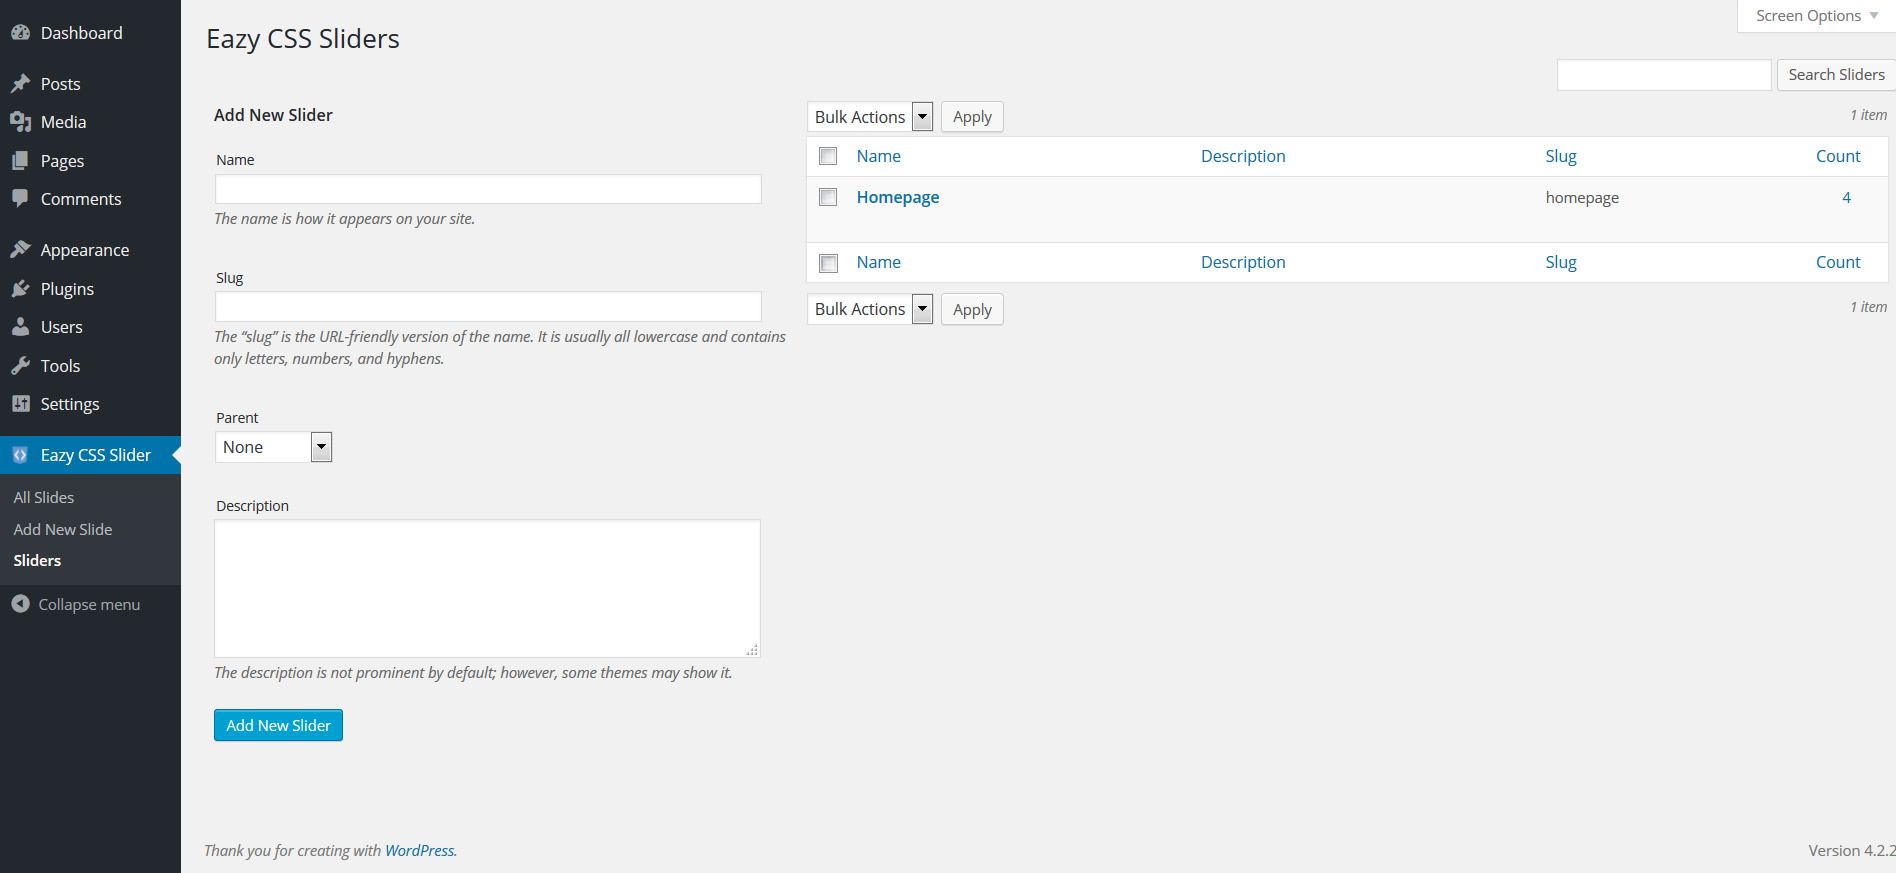 Adding a slider is eazy. The plugin lets you add sliders like you would a post category.